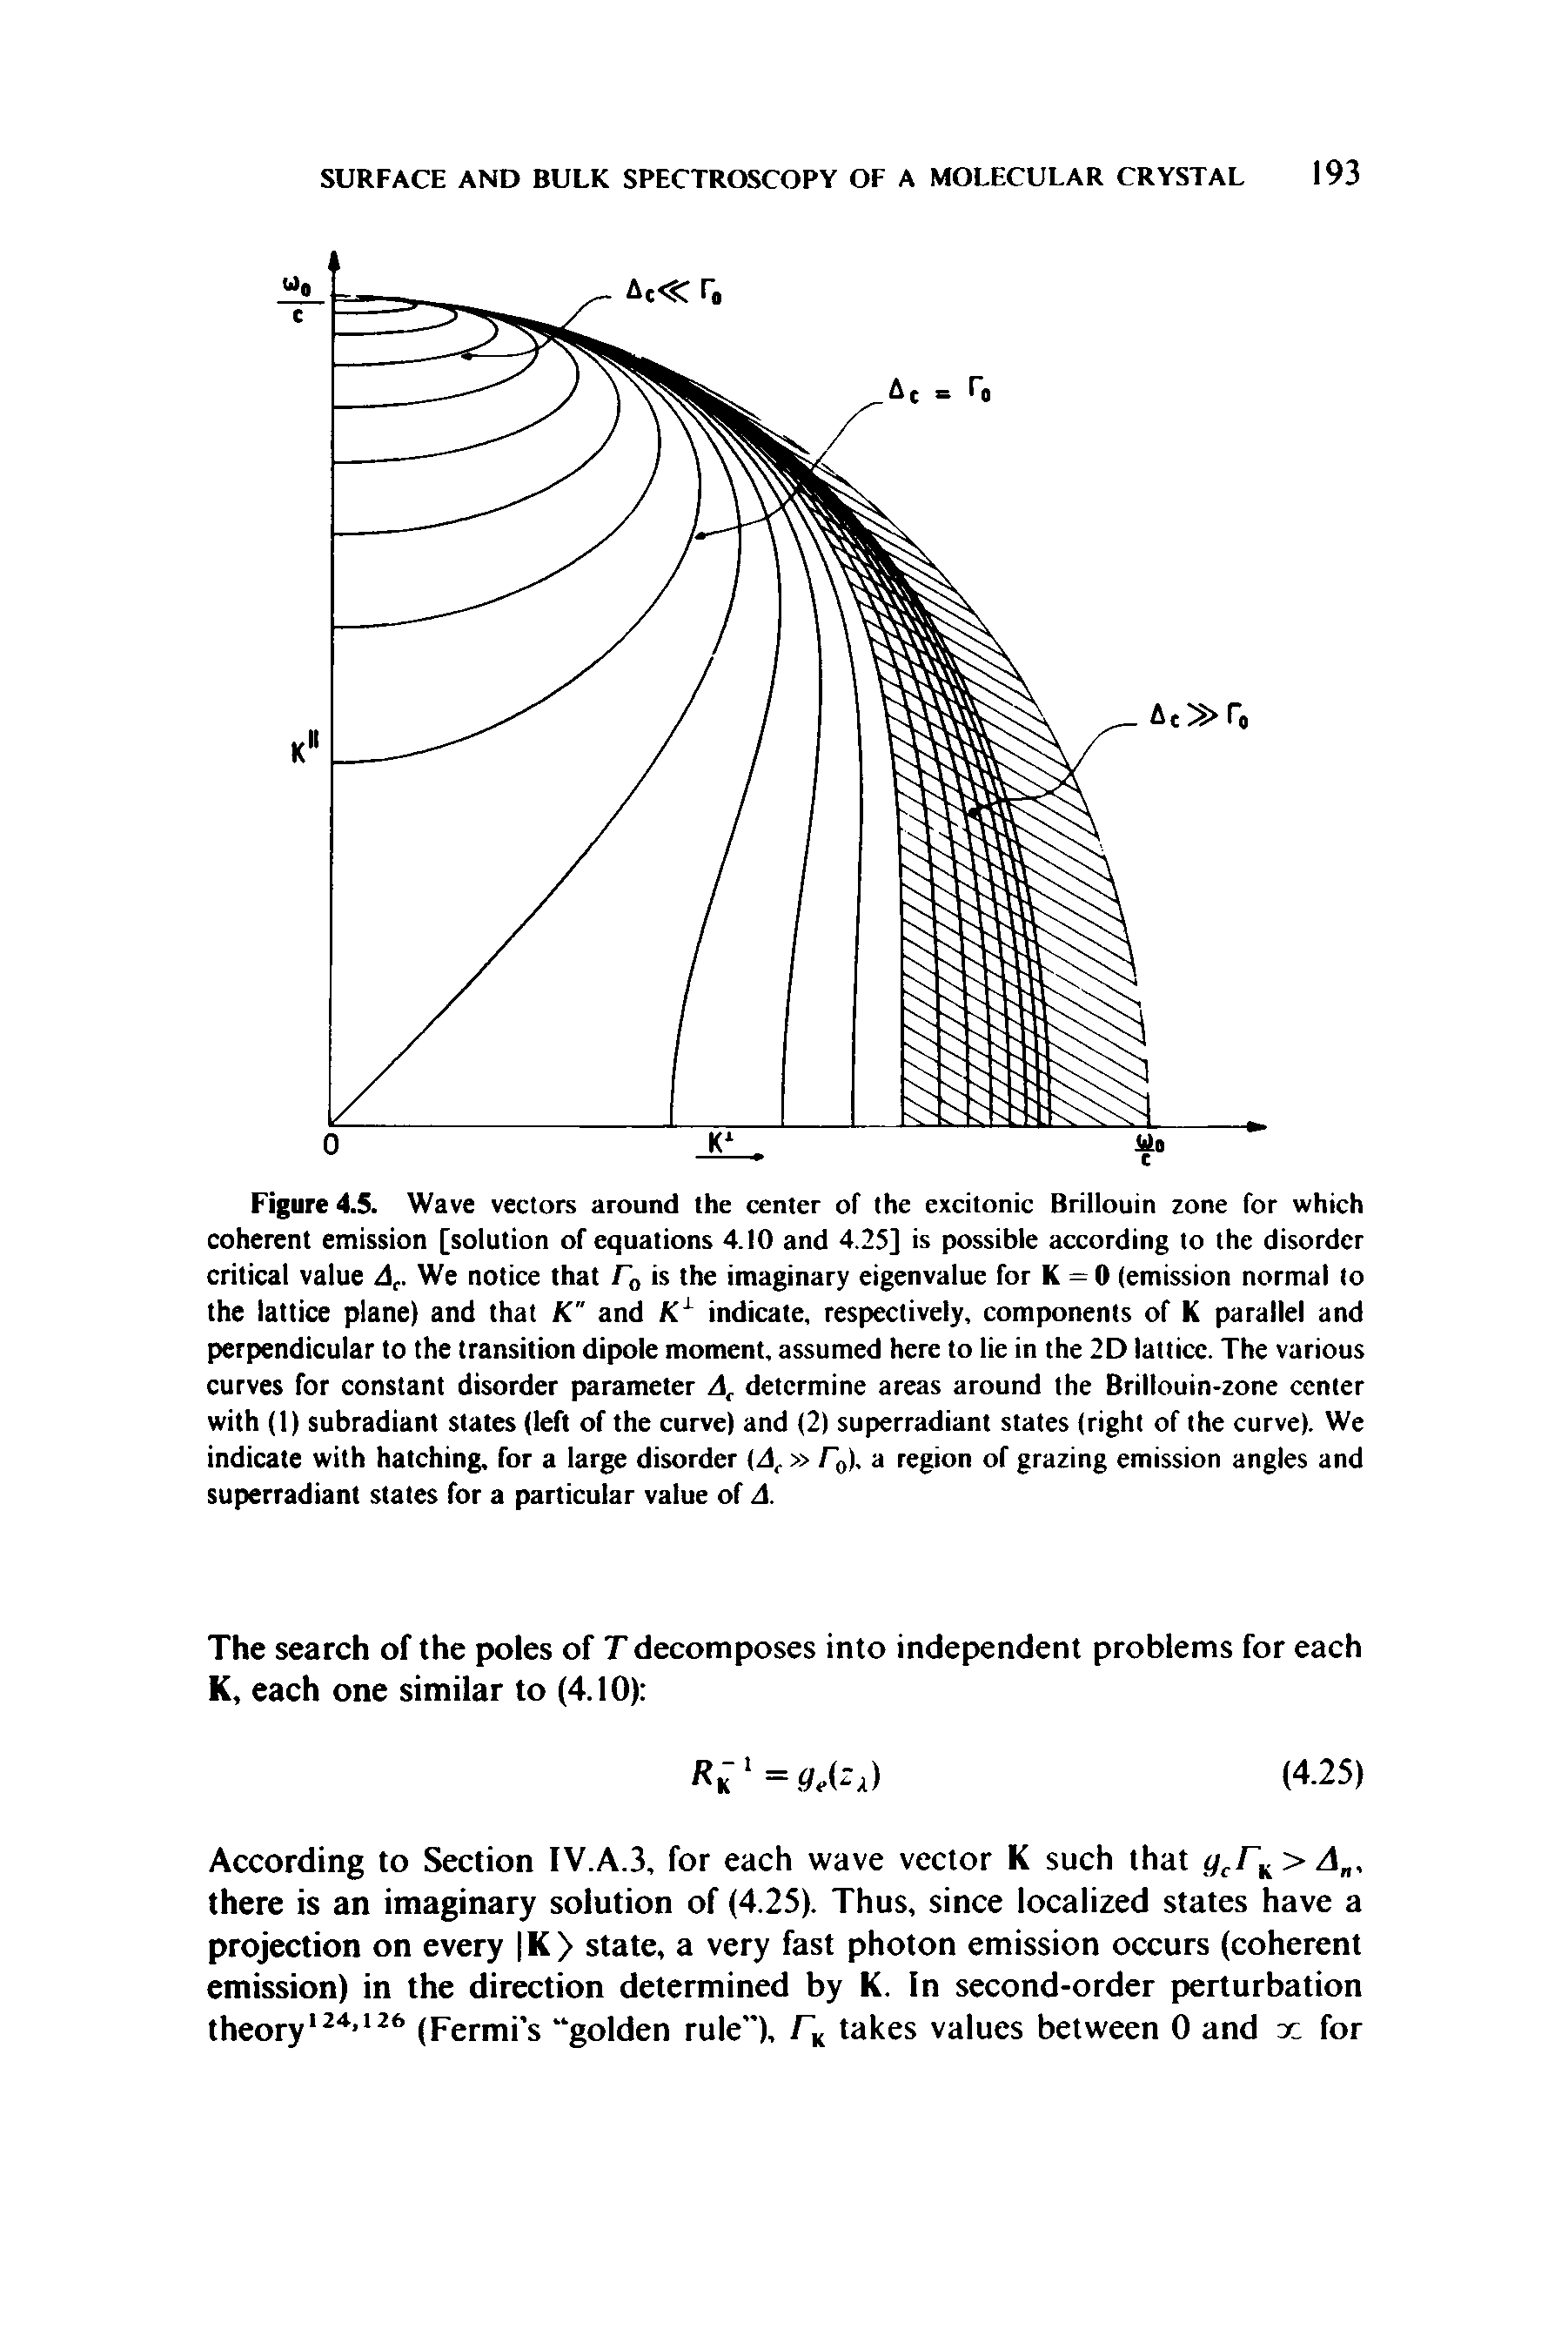 Figure 4.5. Wave vectors around the center of the excitonic Brillouin zone for which coherent emission [solution of equations 4.10 and 4.25] is possible according to the disorder critical value Ac. We notice that r0 is the imaginary eigenvalue for K = 0 (emission normal to the lattice plane) and that K" and K1 indicate, respectively, components of K parallel and perpendicular to the transition dipole moment, assumed here to lie in the 2D lattice. The various curves for constant disorder parameter Ac determine areas around the Brillouin-zone center with (1) subradiant states (left of the curve) and (2) superradiant states (right of the curve). We indicate with hatching, for a large disorder (A,. r ), a region of grazing emission angles and superradiant states for a particular value of A.